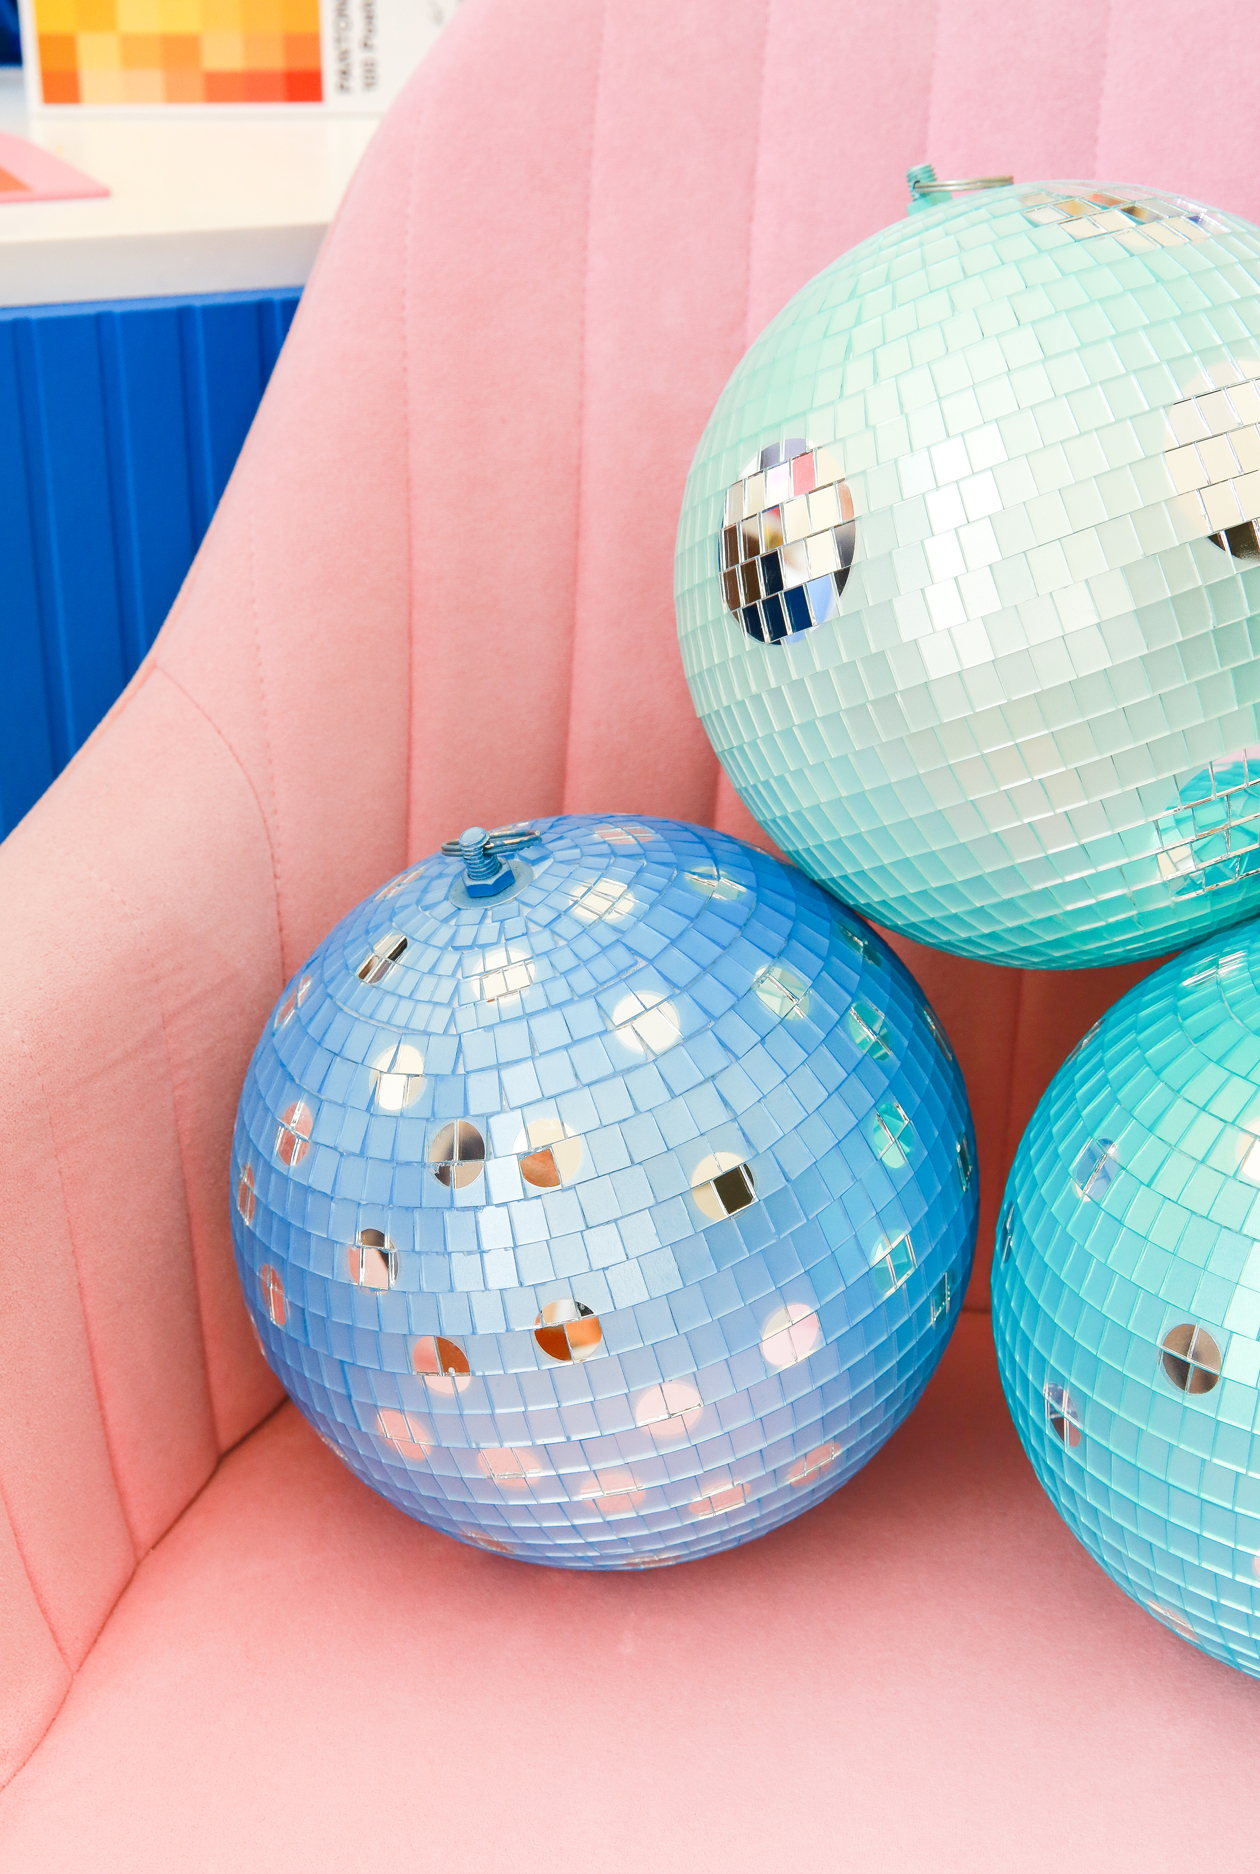 How to Make Colorful Disco Balls